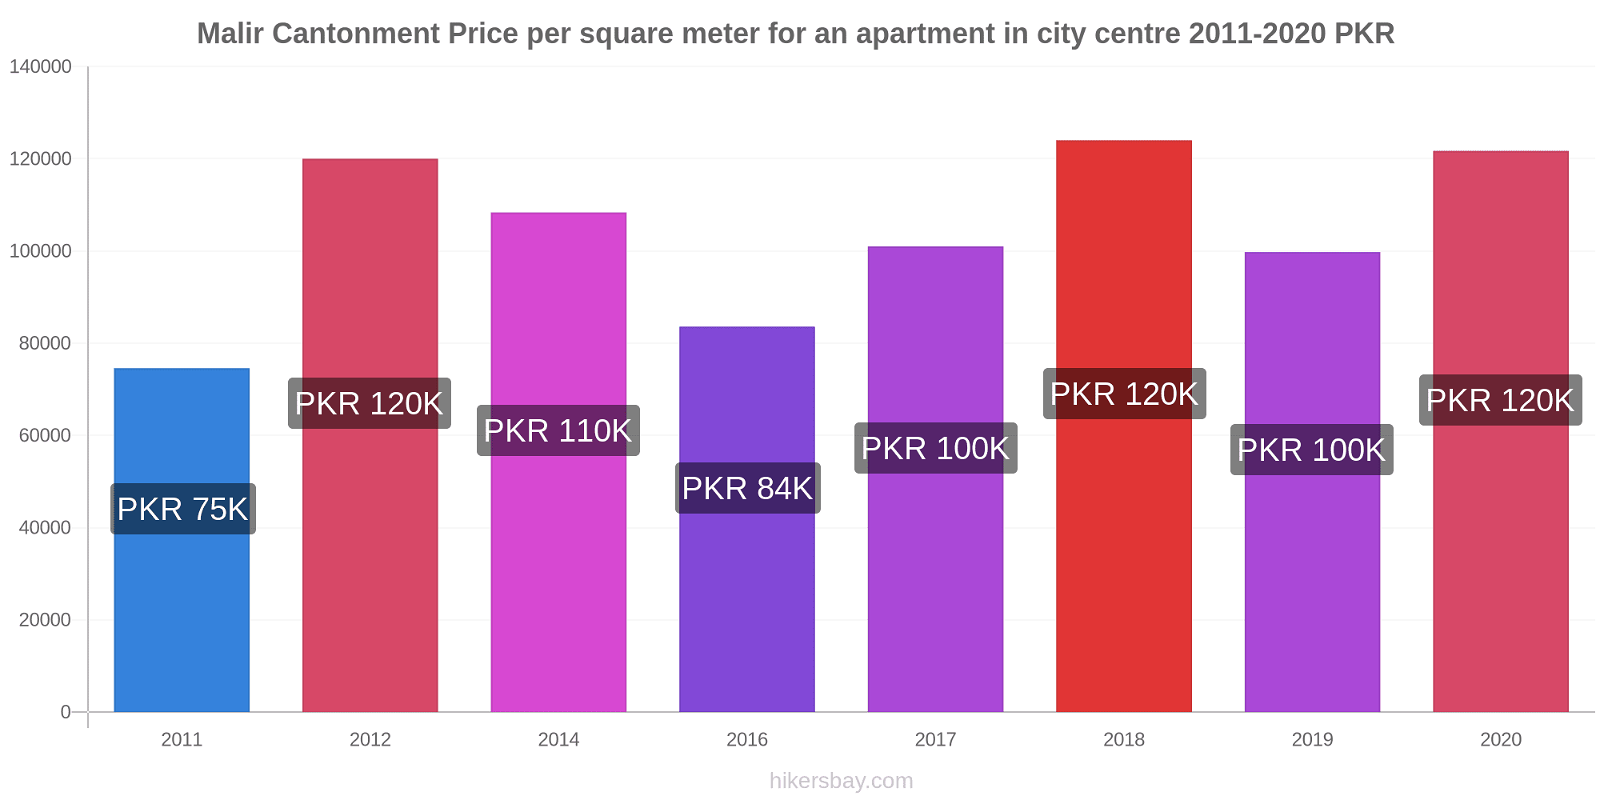 Malir Cantonment price changes Price per square meter for an apartment in city centre hikersbay.com